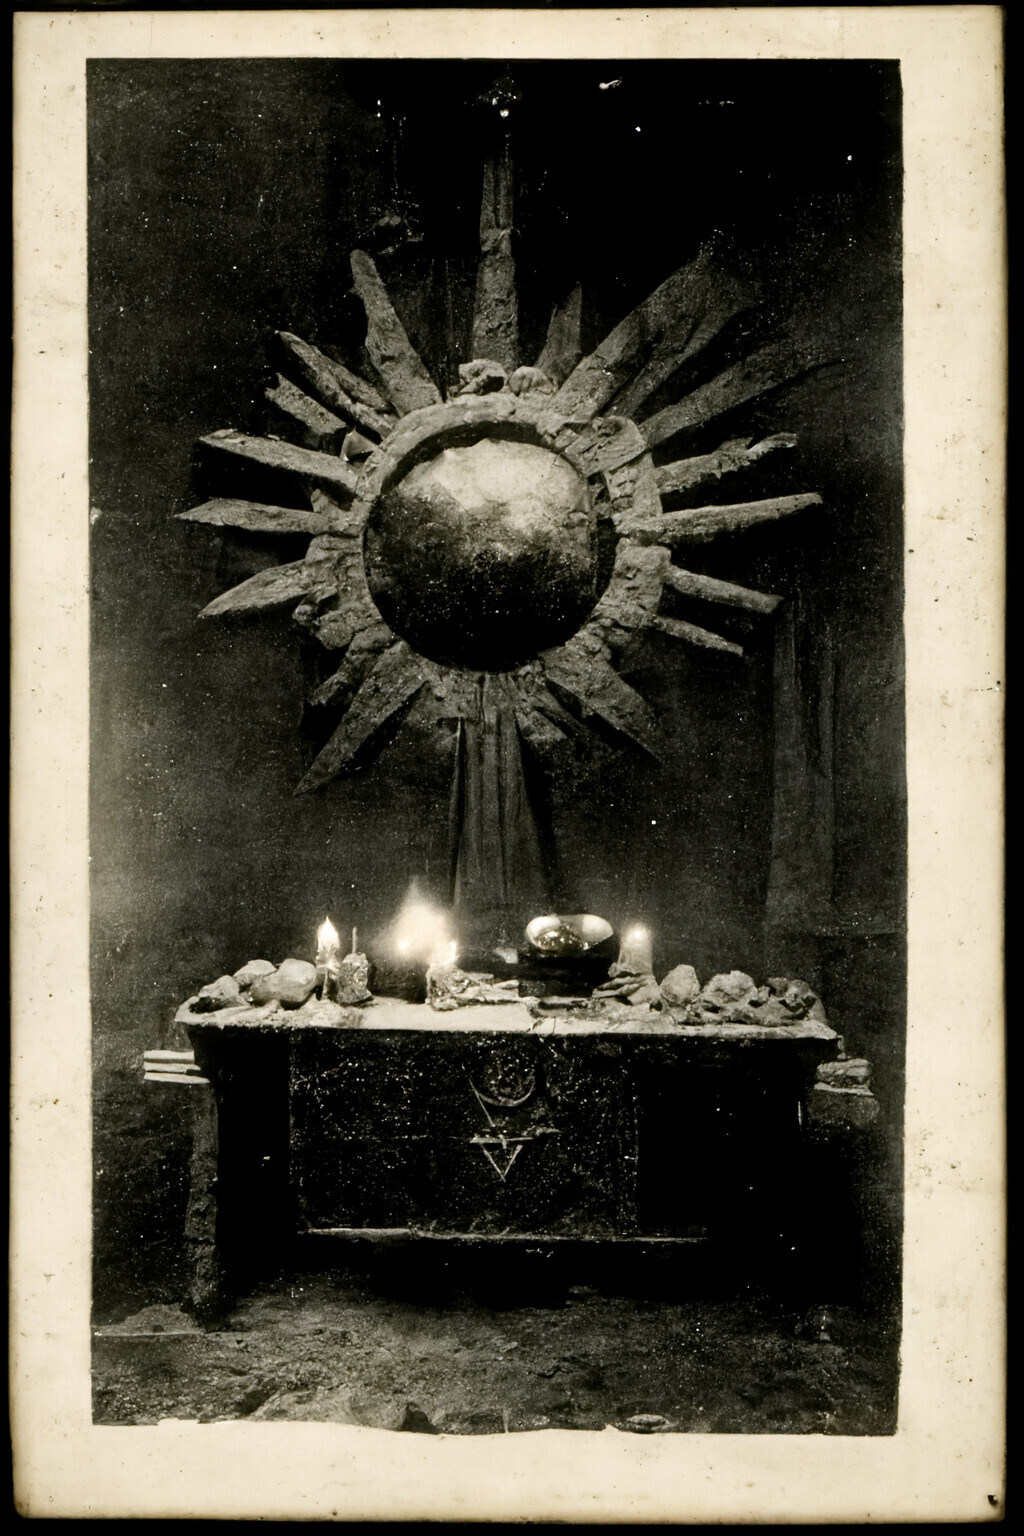 The Star of Truth
c. 1881
Photograph